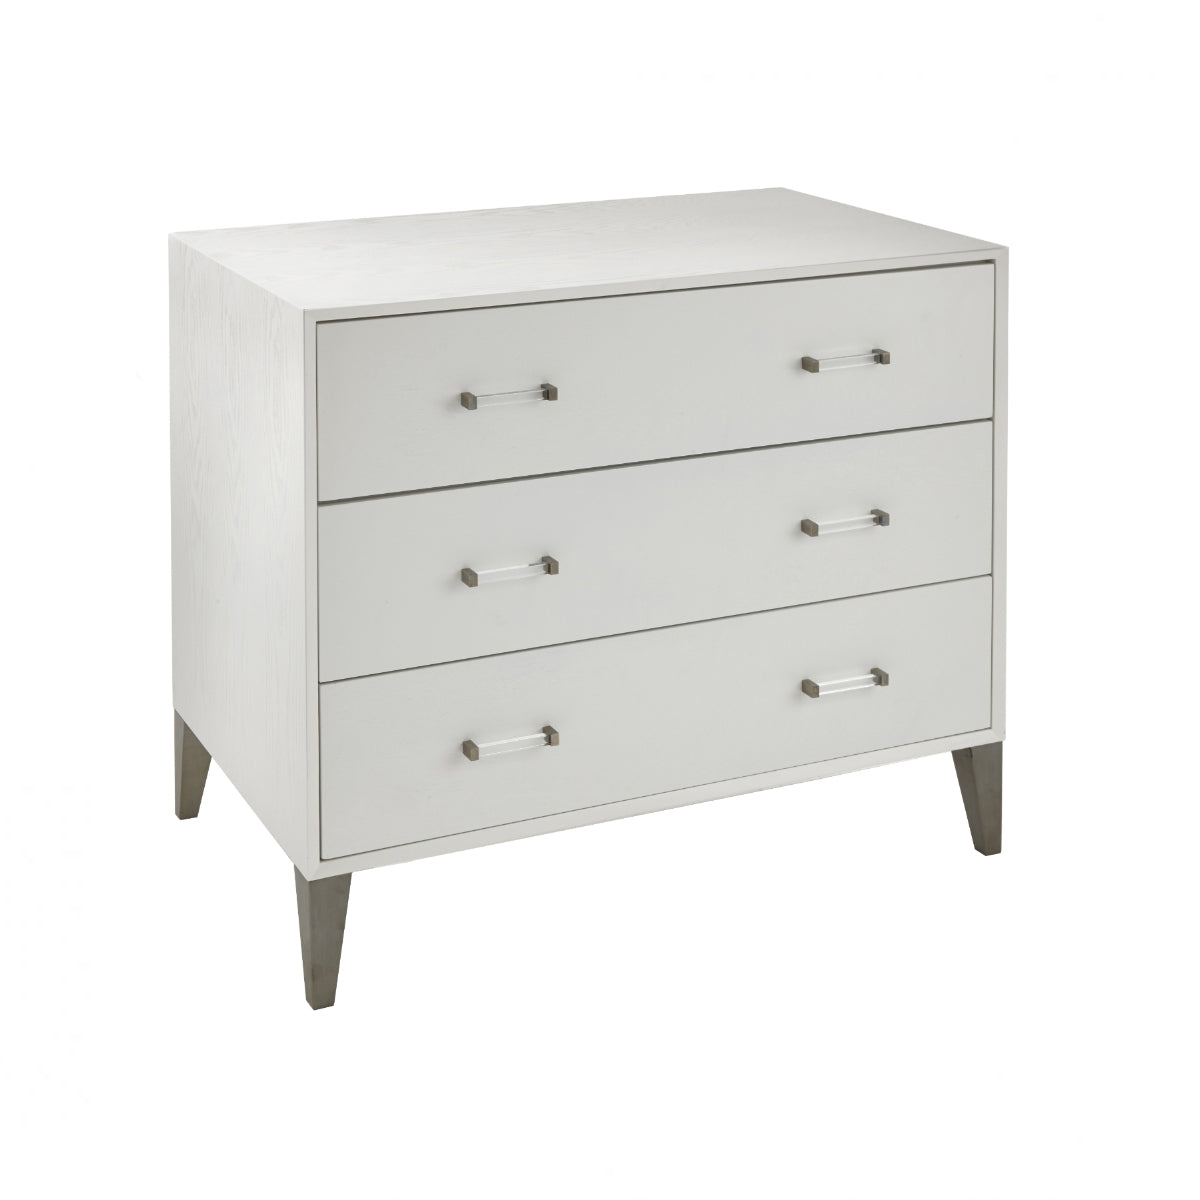 RV Astley Dana Chest of Drawers in White